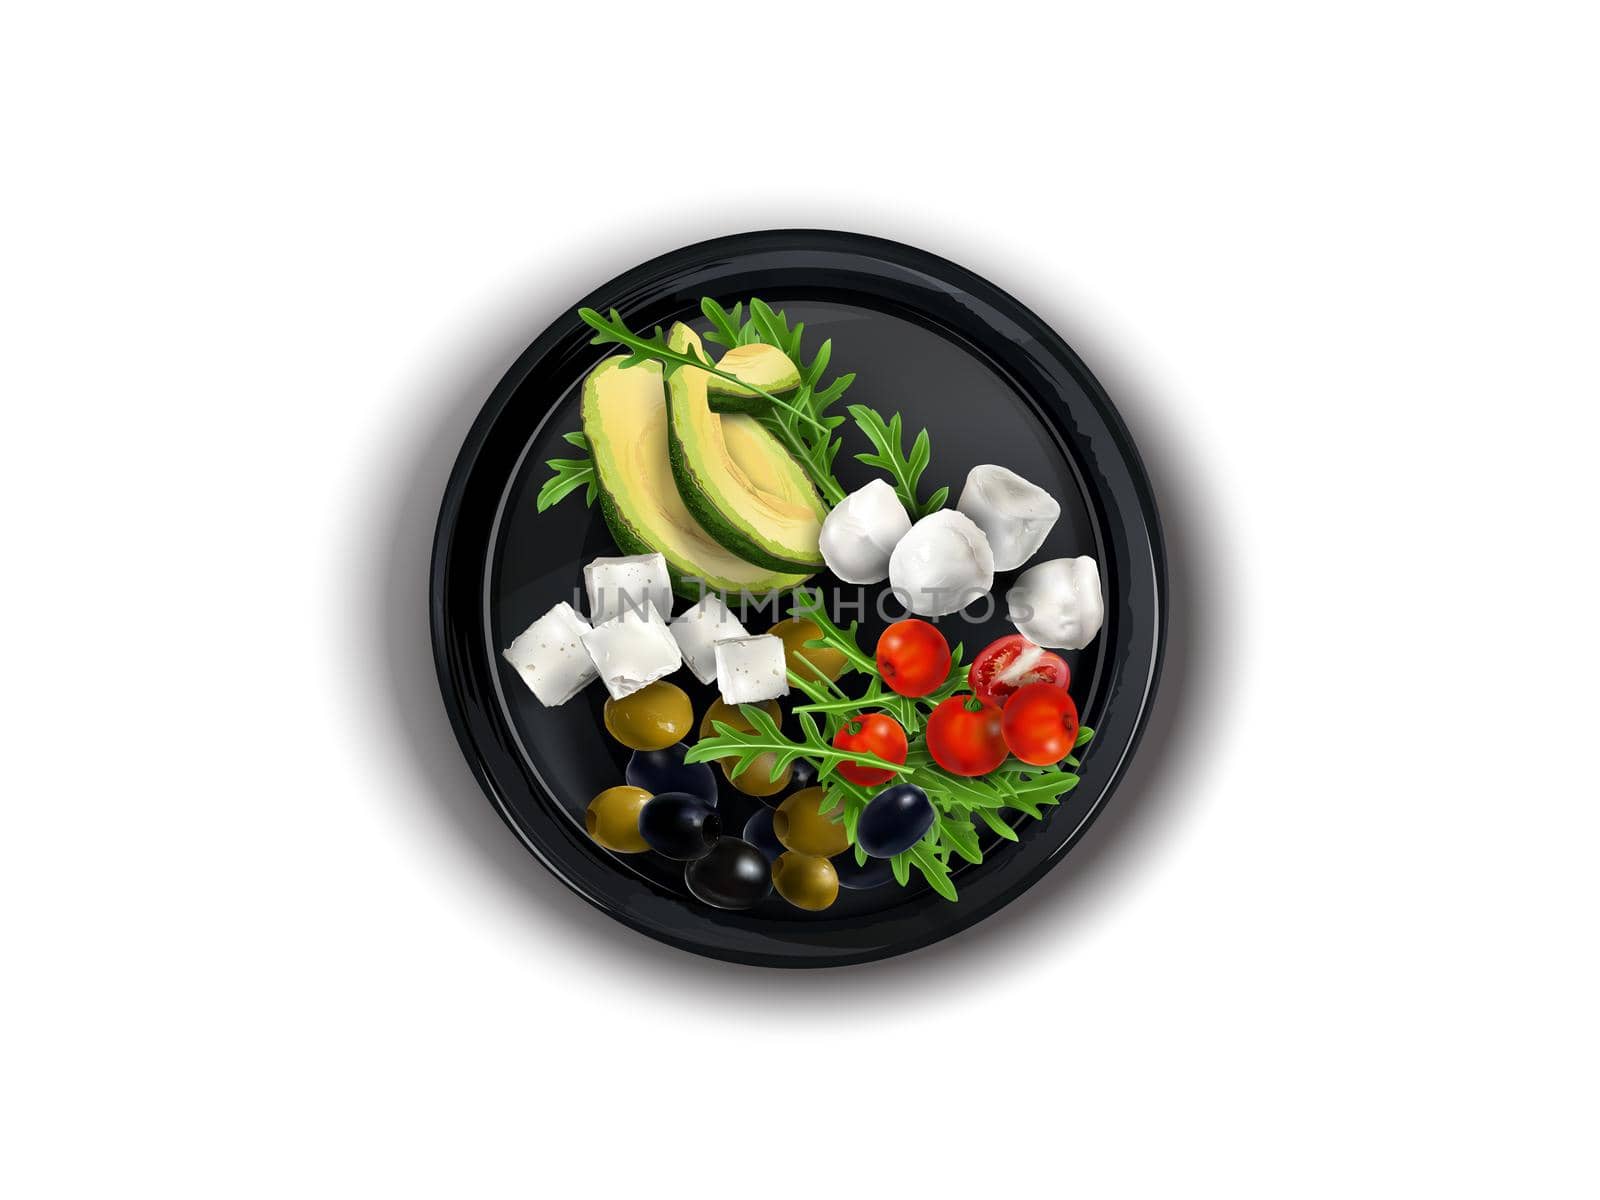 Feta and Mozzarella cheese with vegetables on a black plate. by ConceptCafe